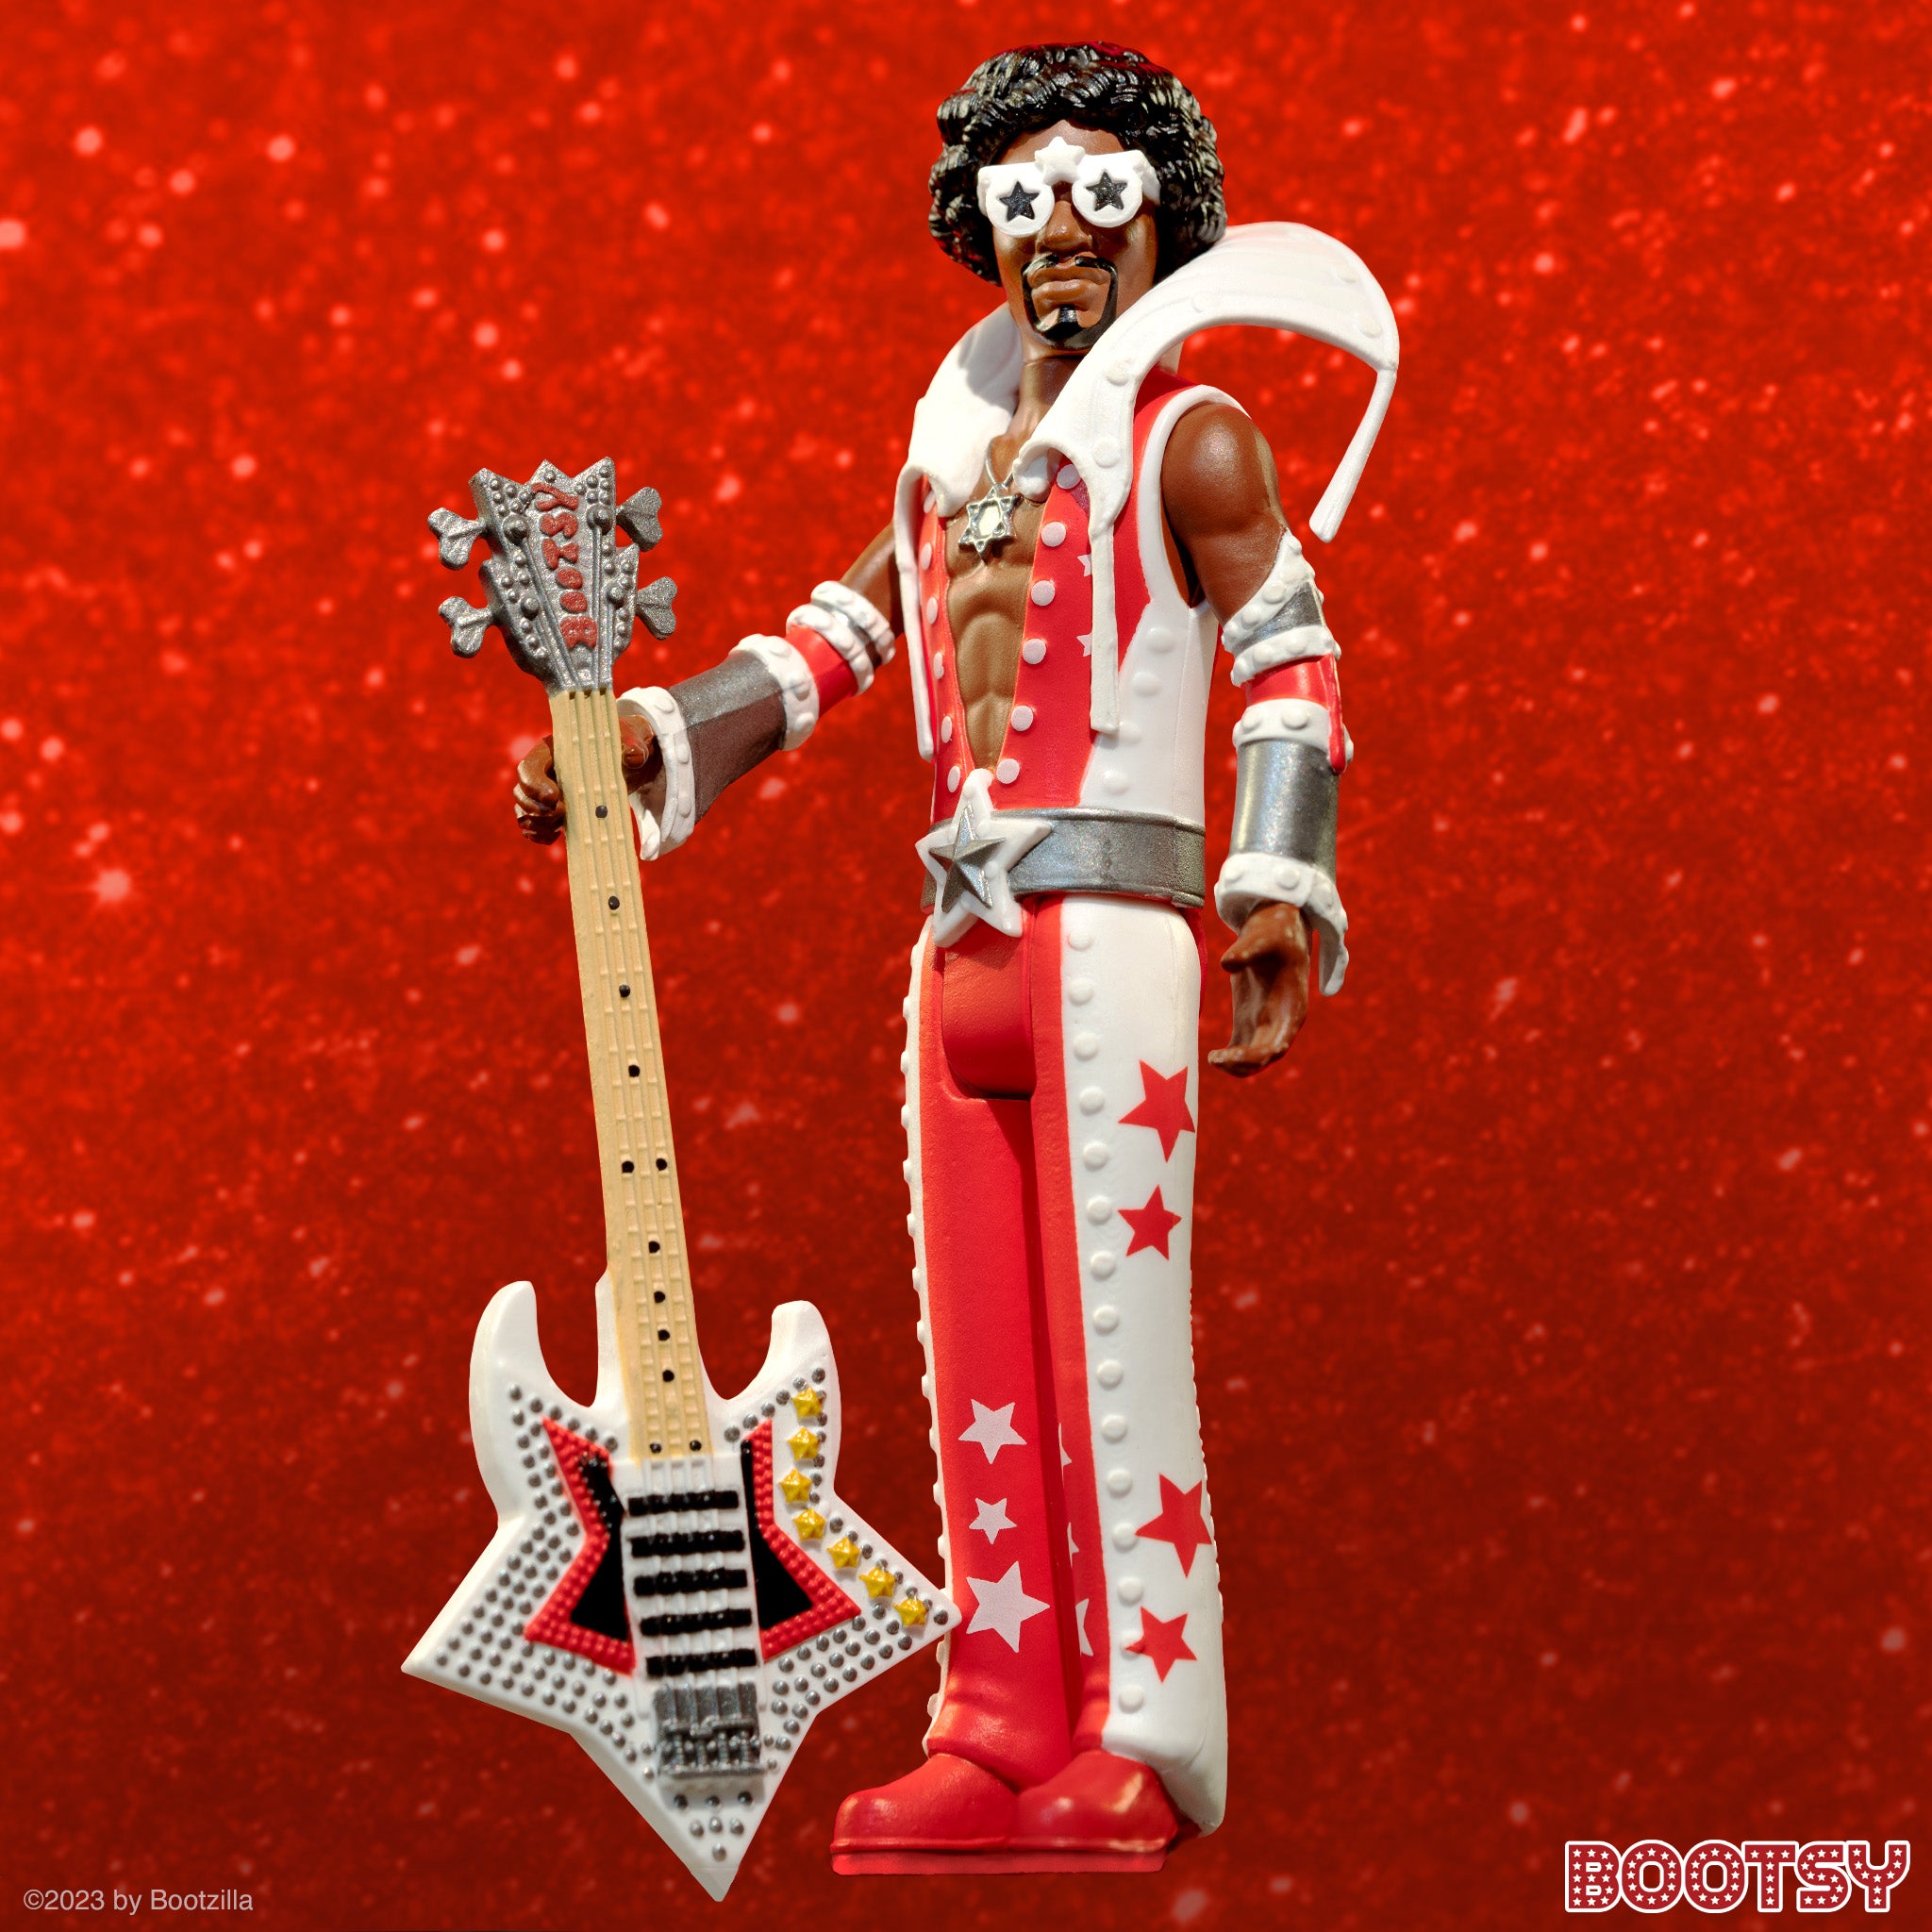 Bootsy Collins ReAction Figure - Bootsy Collins (Red and White)